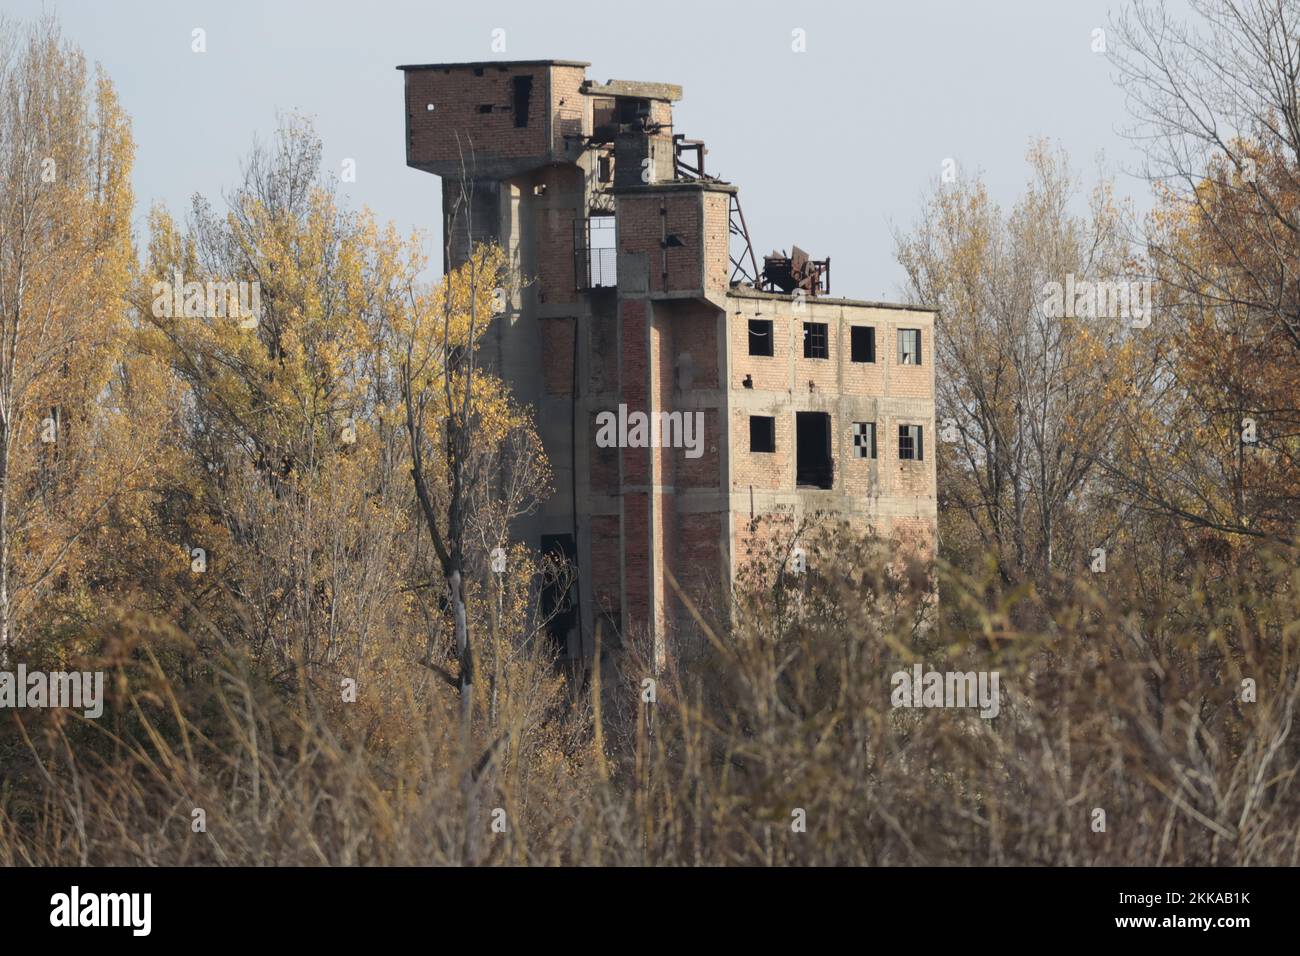 Abandoned oil mill surrounded by vegetation Stock Photo